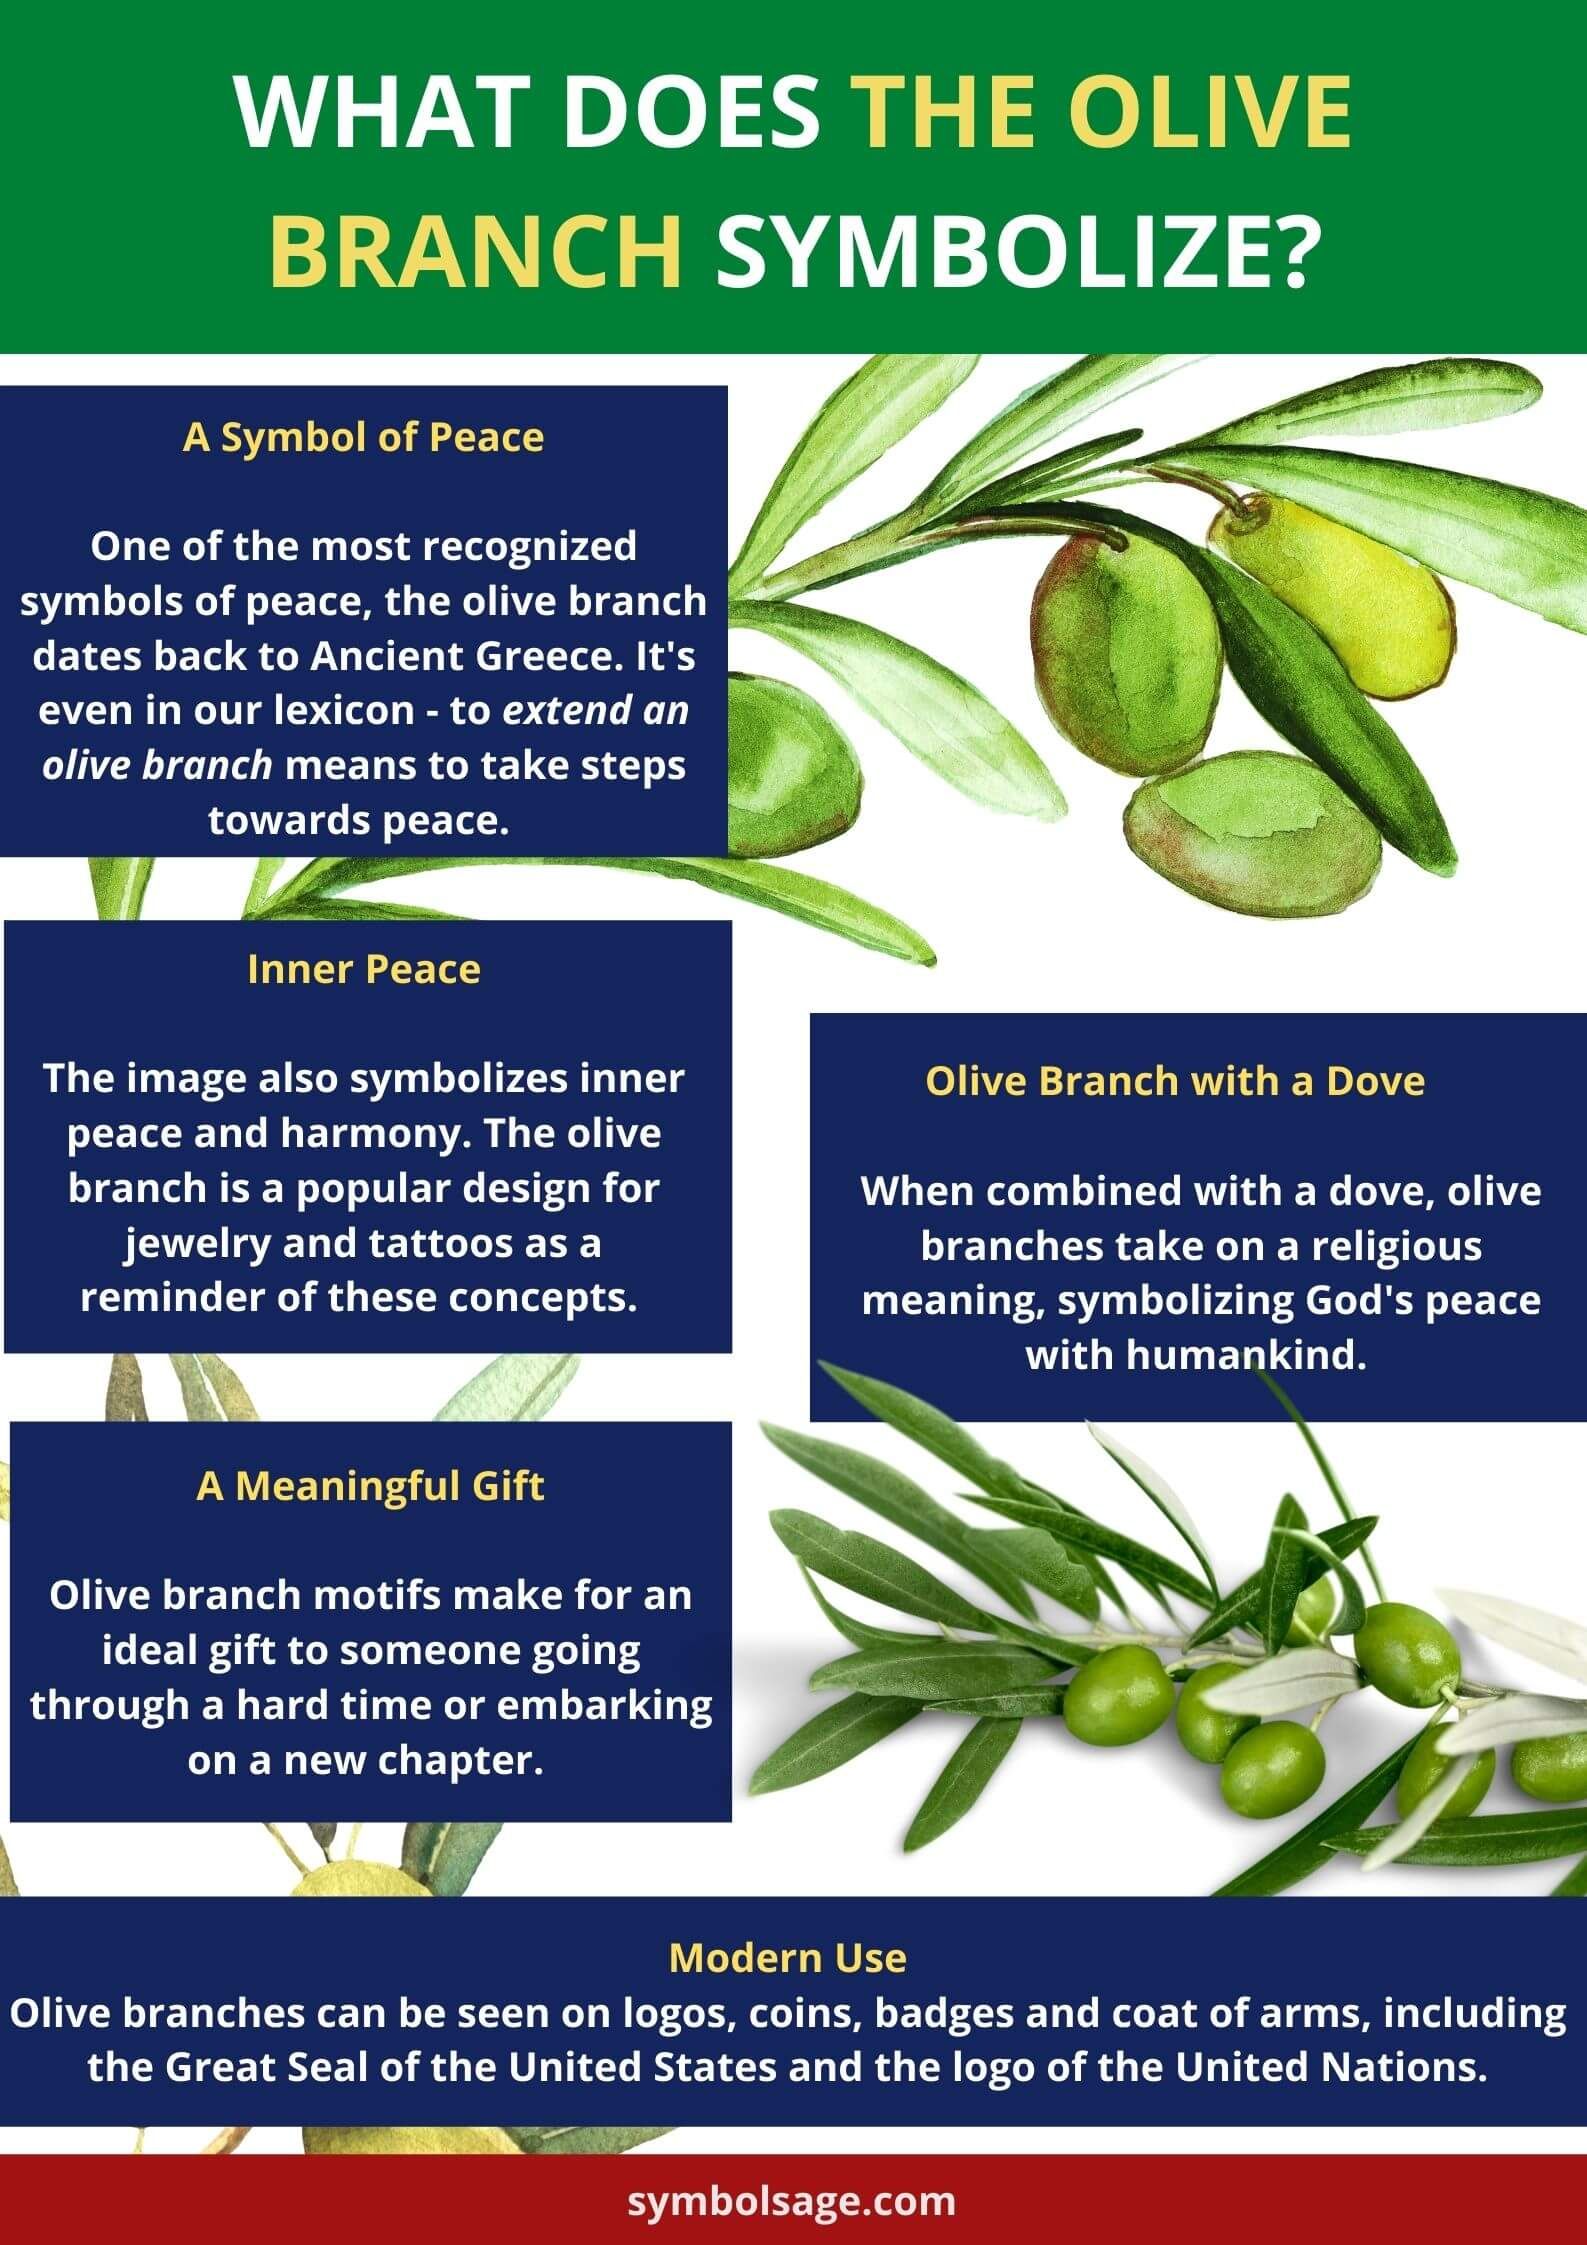 What does an olive branch symbolize?